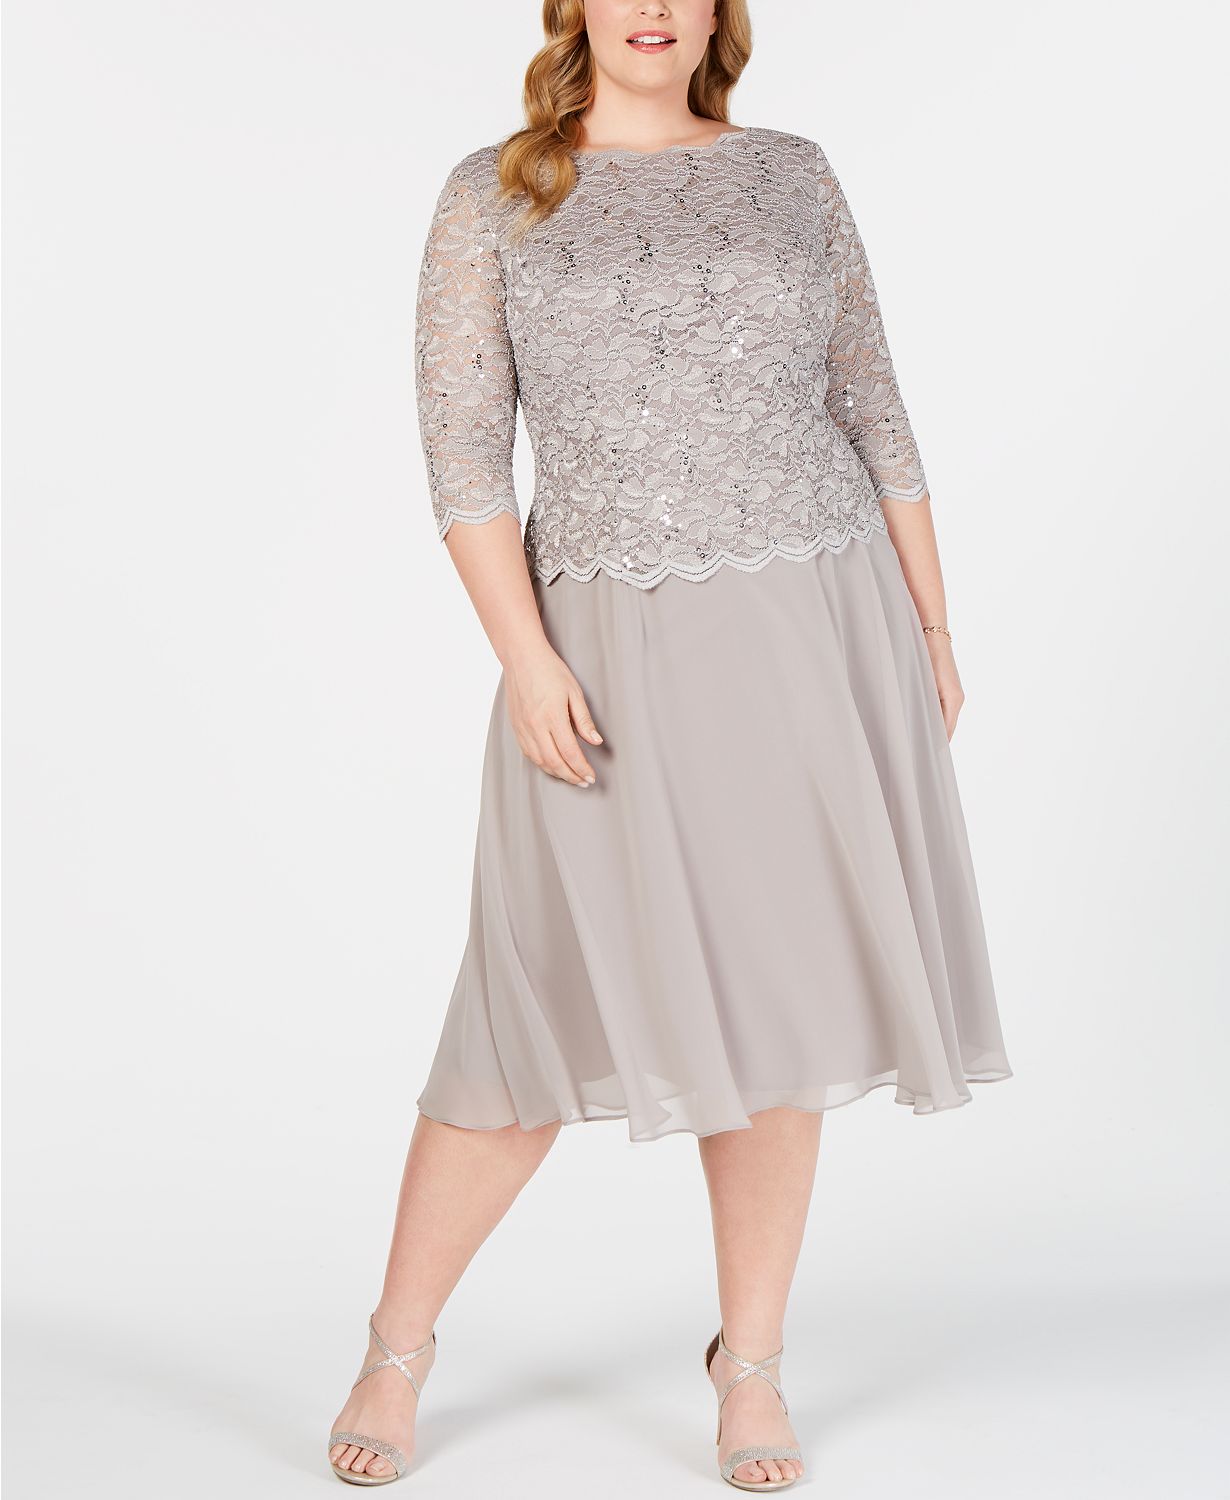 How to Choose Mother of the Groom Dresses for Plus Size